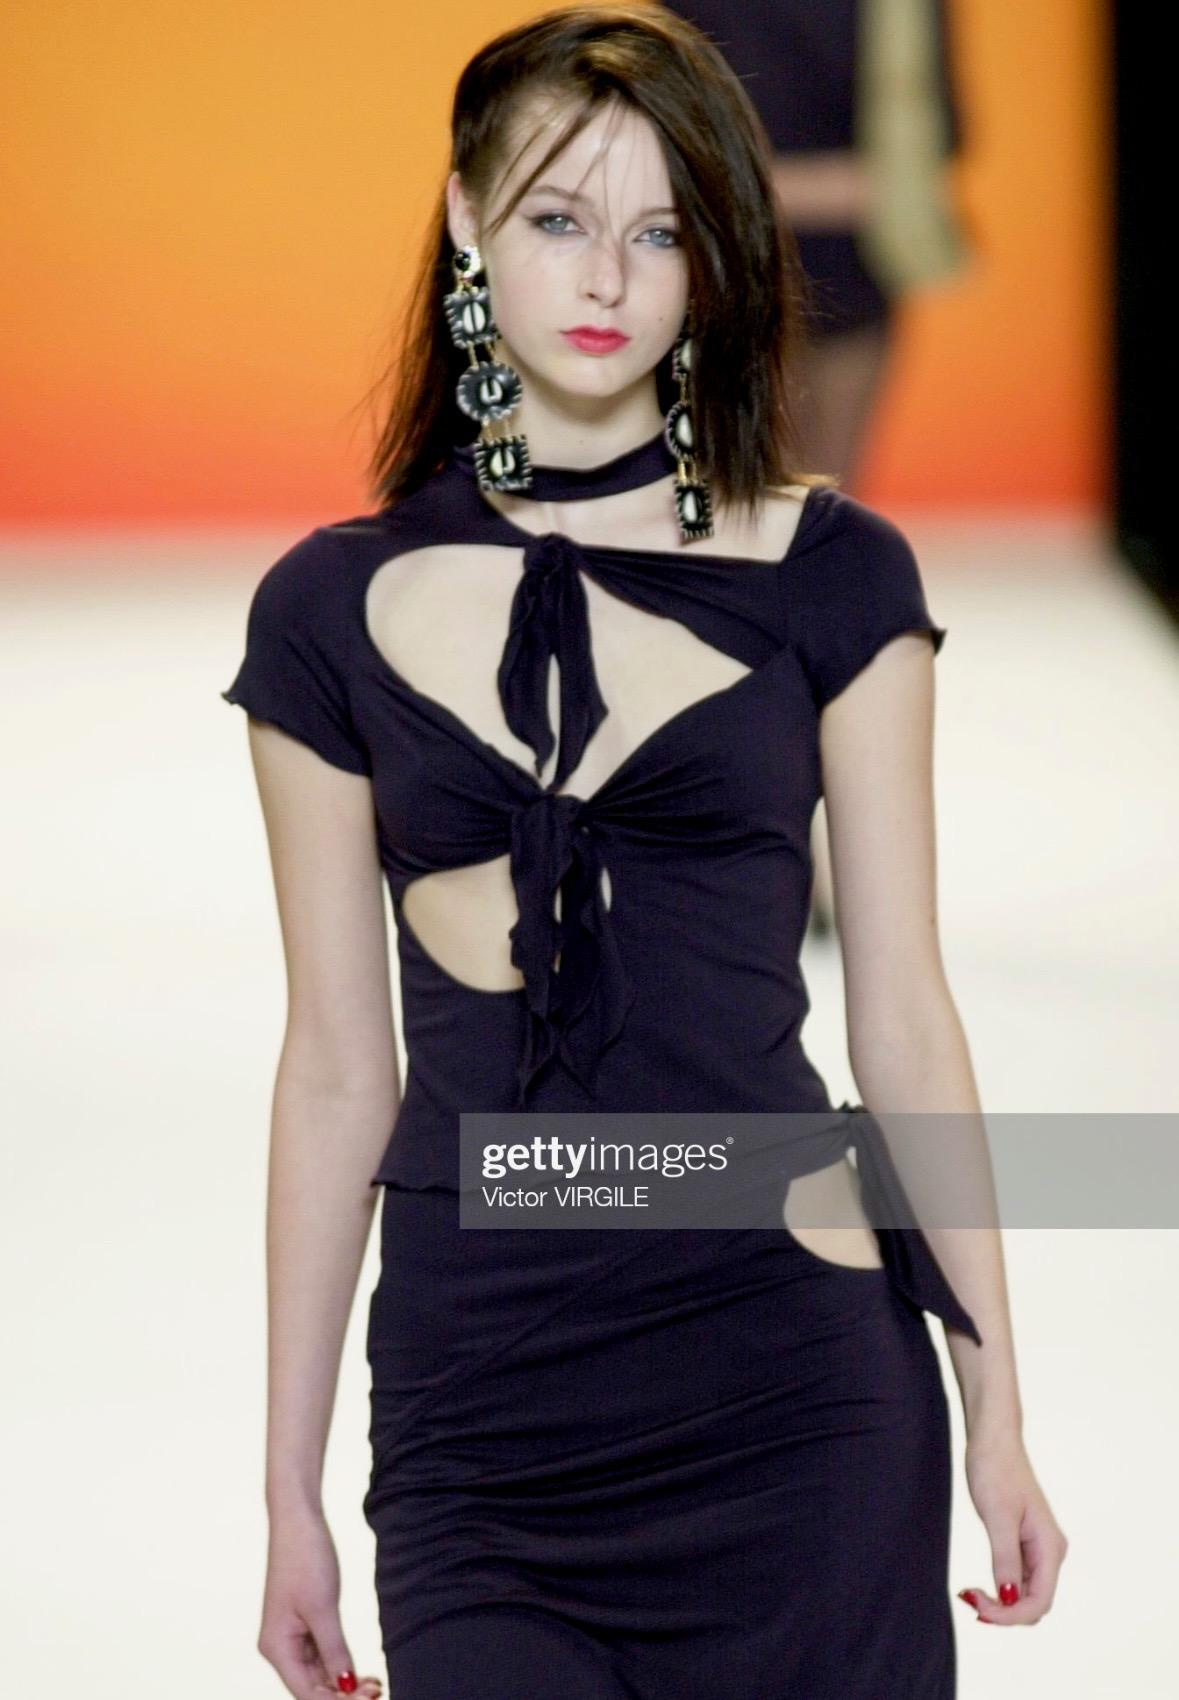 Presenting a fabulous black Anna Sui tie top. From the Spring/Summer 2001 collection, a version of this top debuted on the season's runway as part of look 4, modeled by Jenny Vatheur. This slashed stretch t-shirt features ties throughout the front